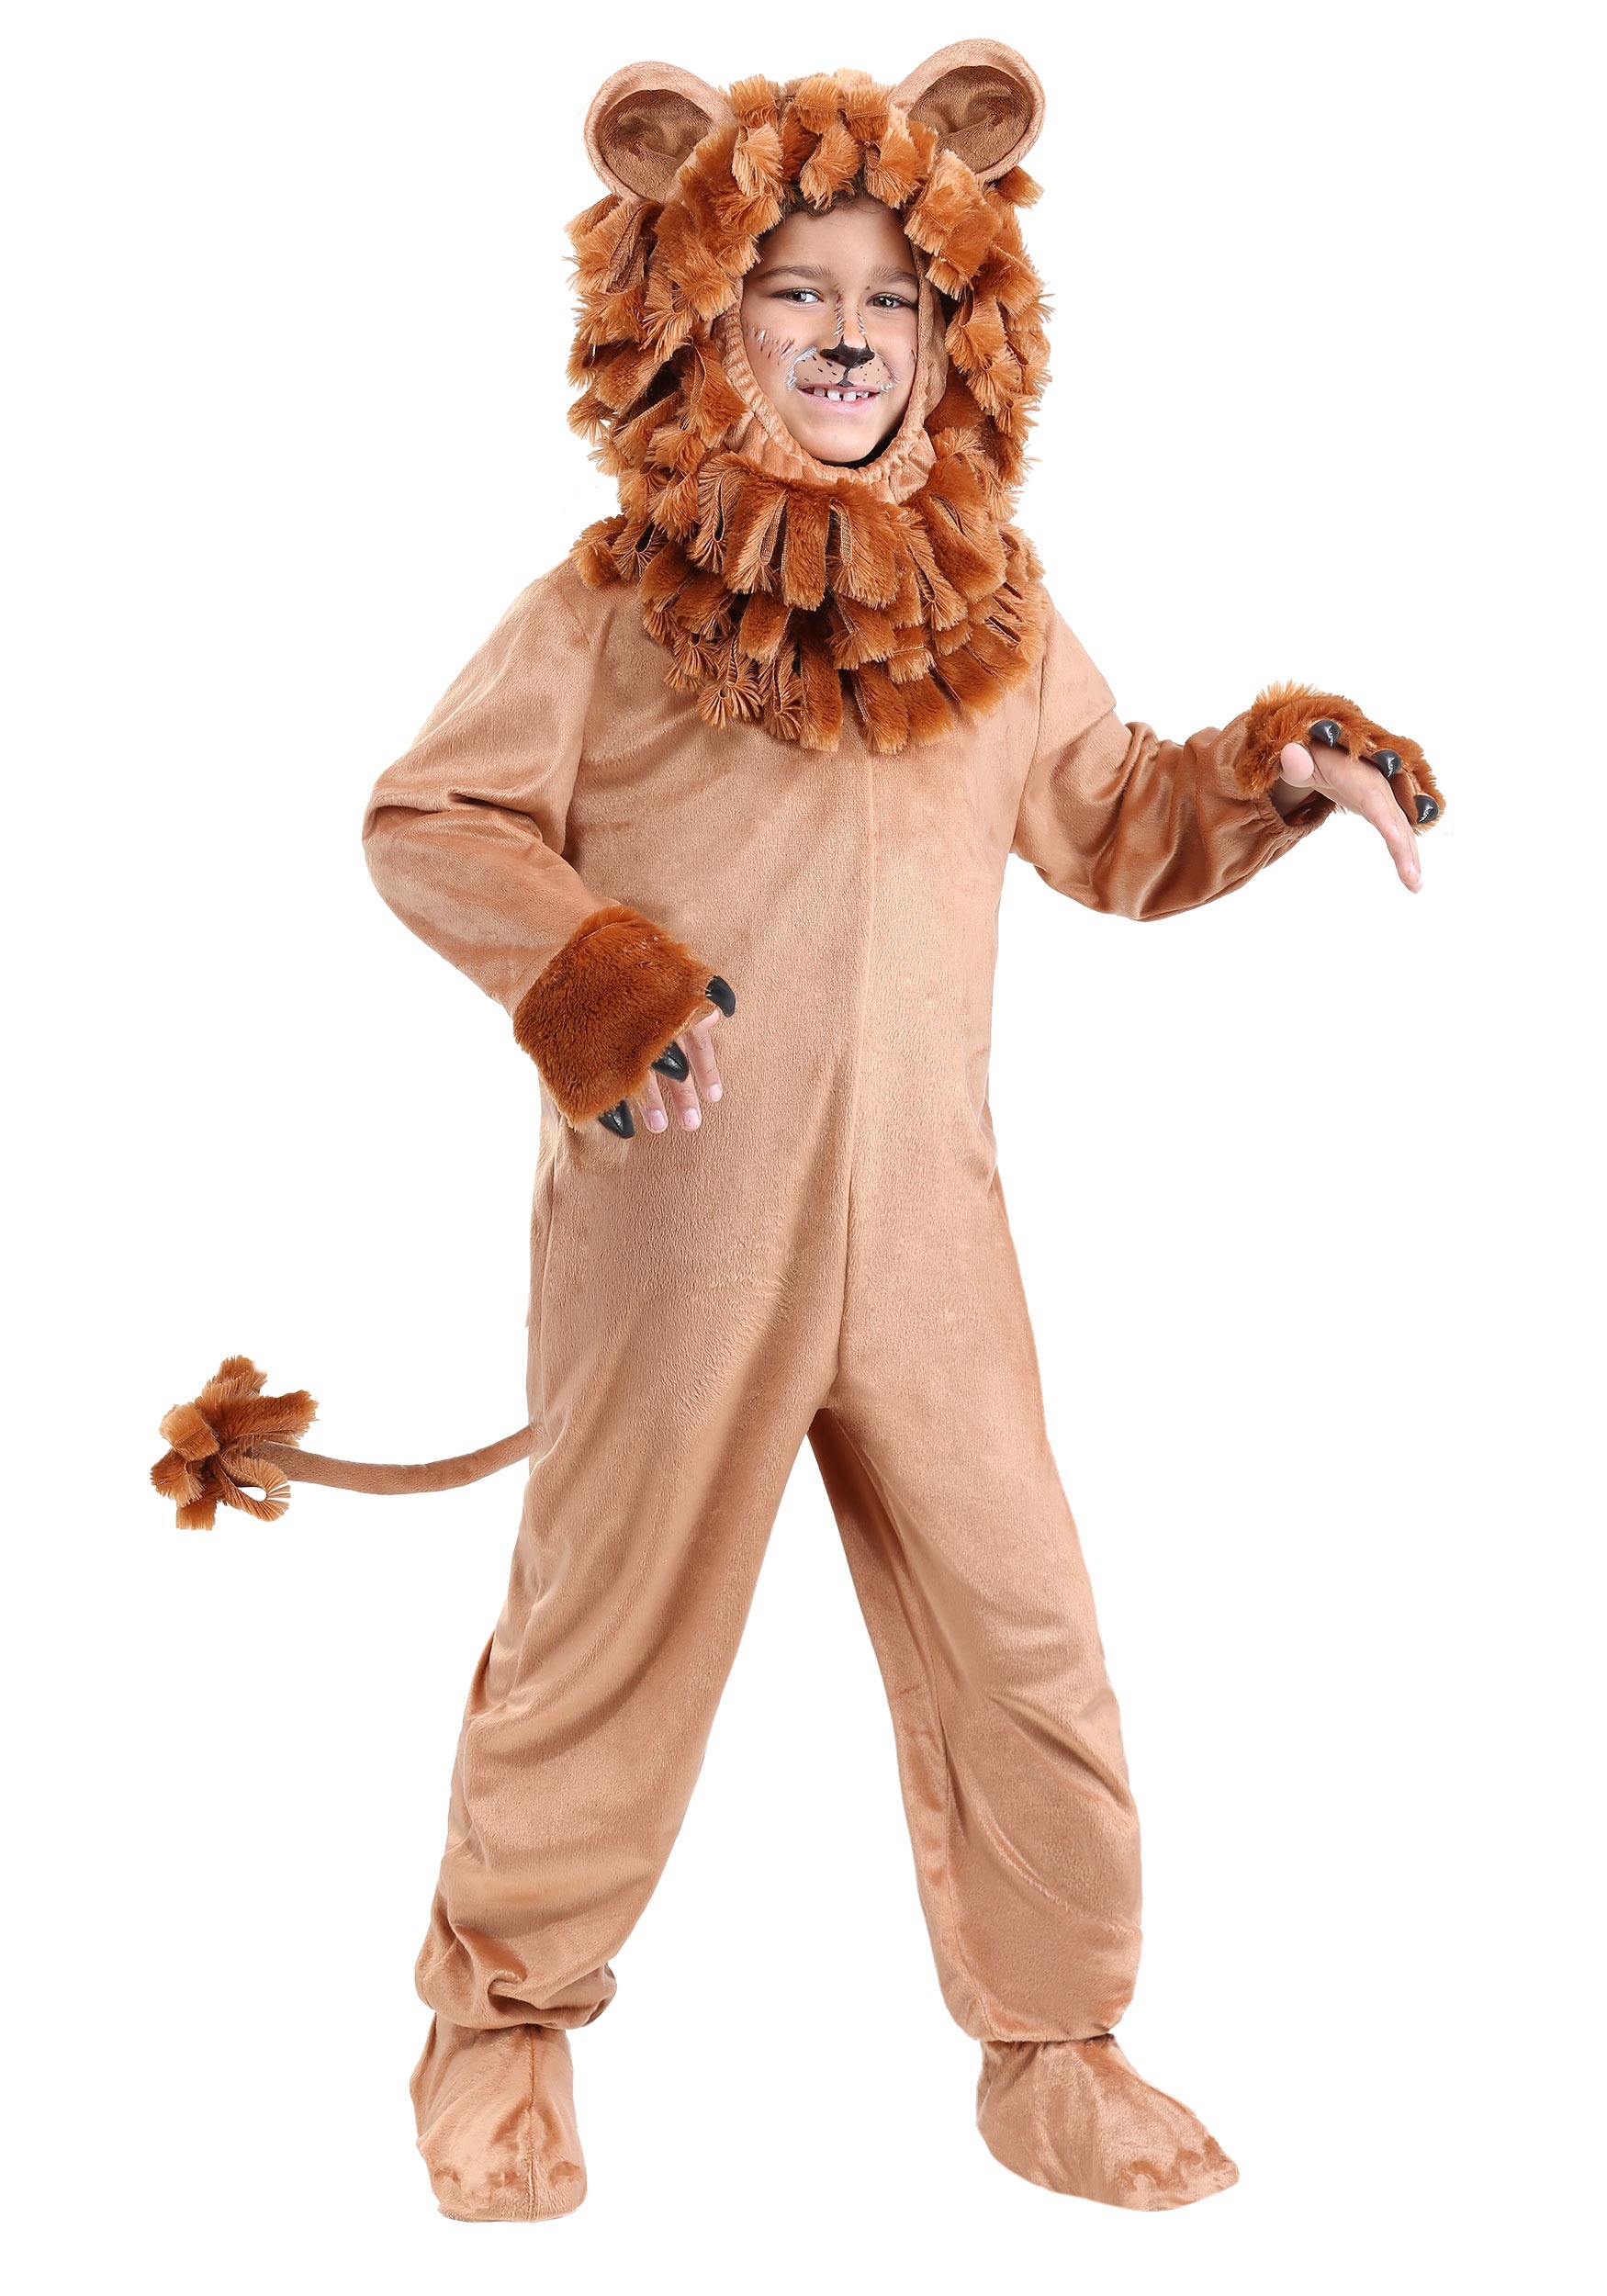 Image of Lovable Lion Costume for a Child ID FUN2635CH-XL